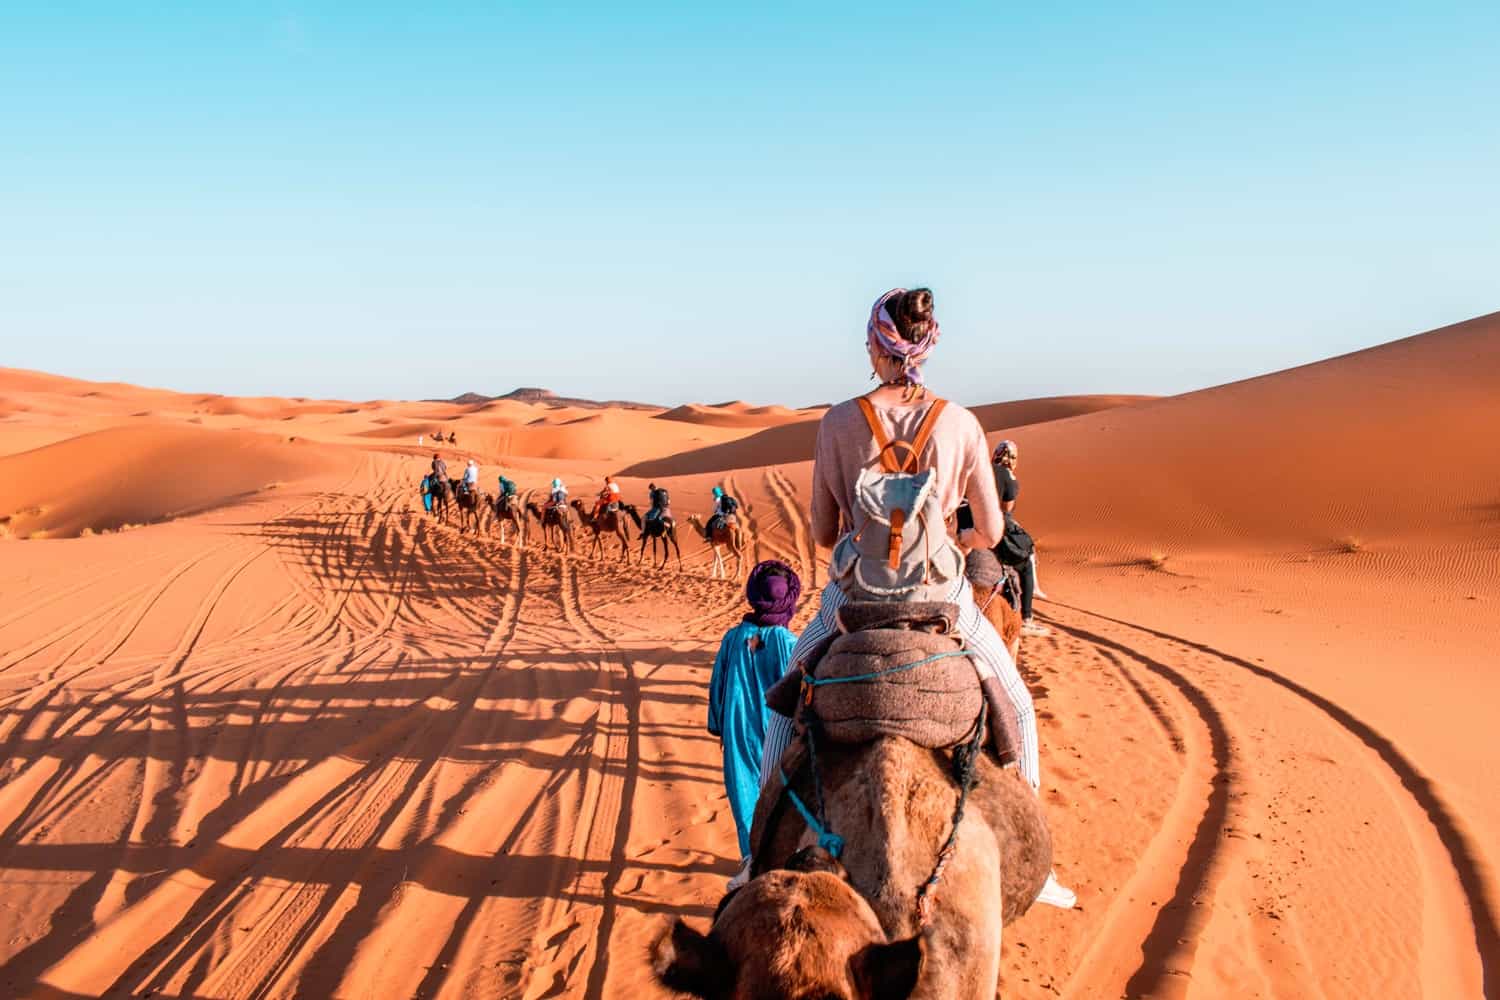 Some people walking and riding the camel at the dessert